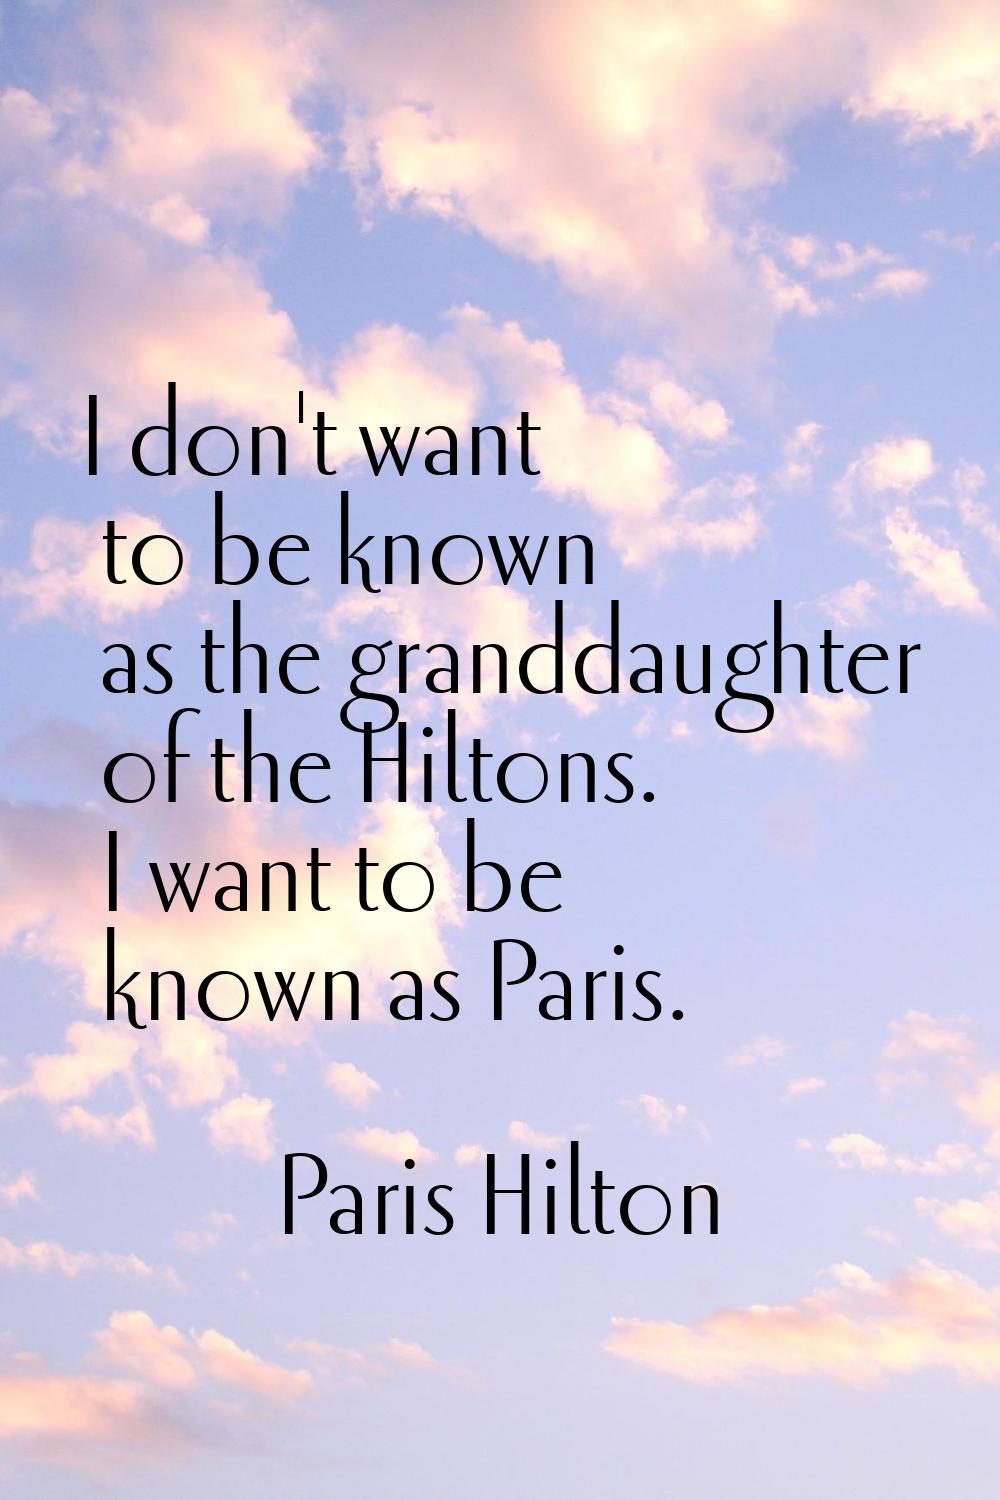 I don't want to be known as the granddaughter of the Hiltons. I want to be known as Paris.